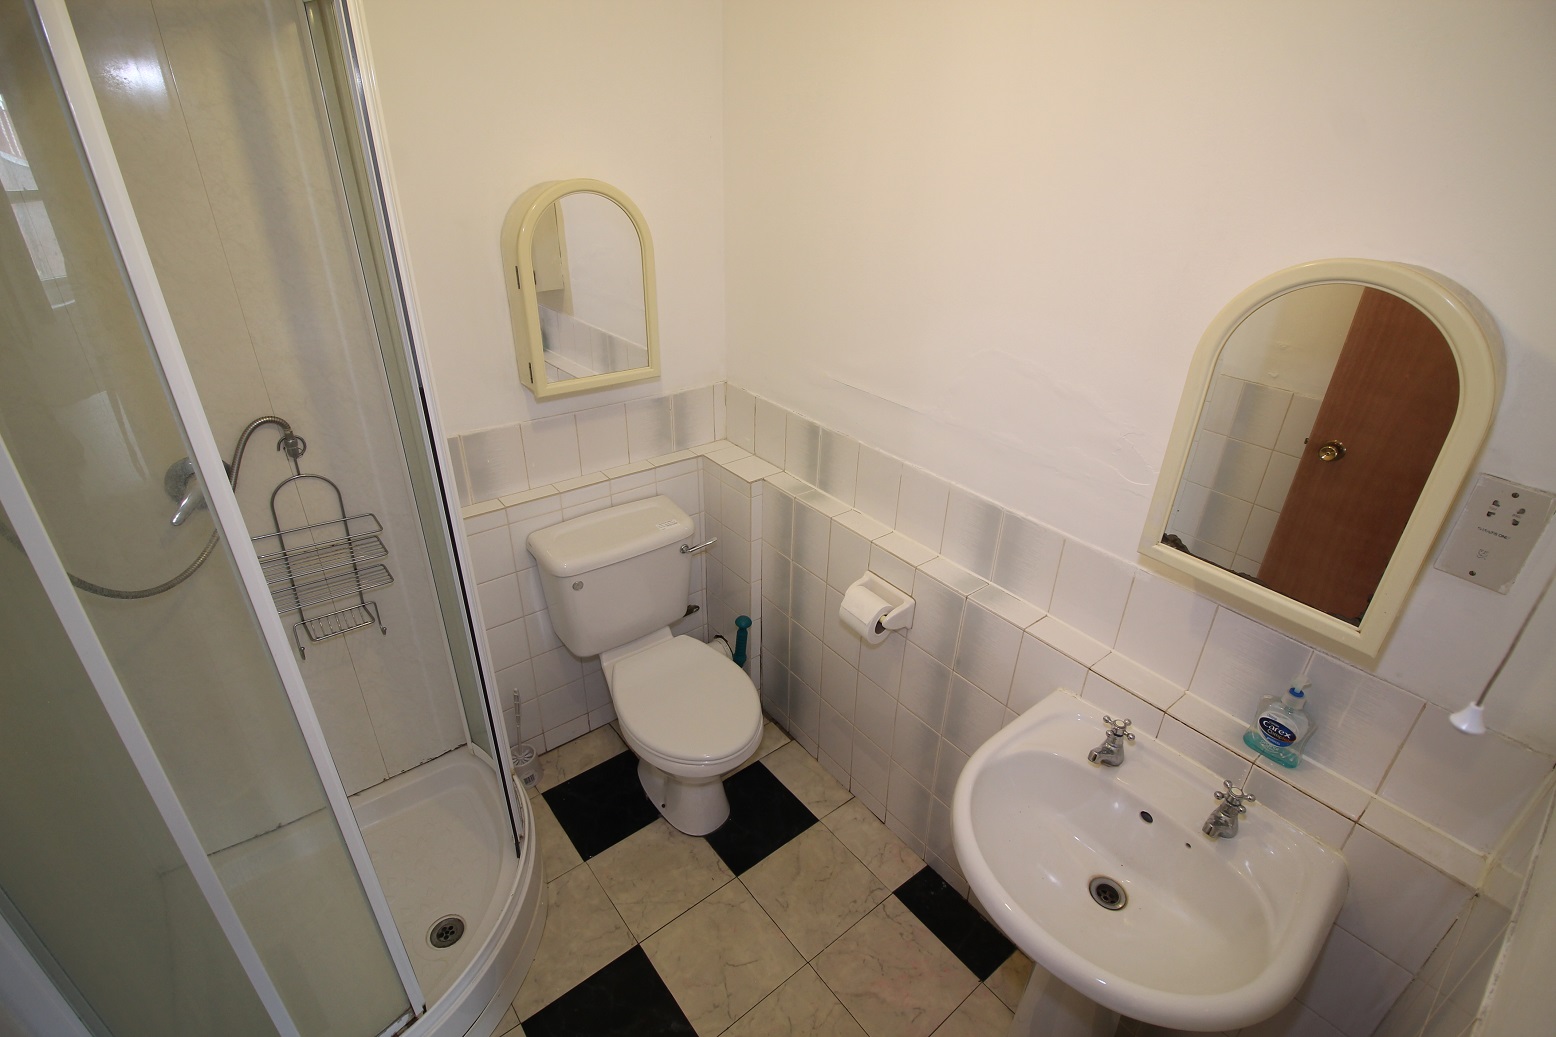 Ensuite bedroom available for affordable rent. RoomsLocal image